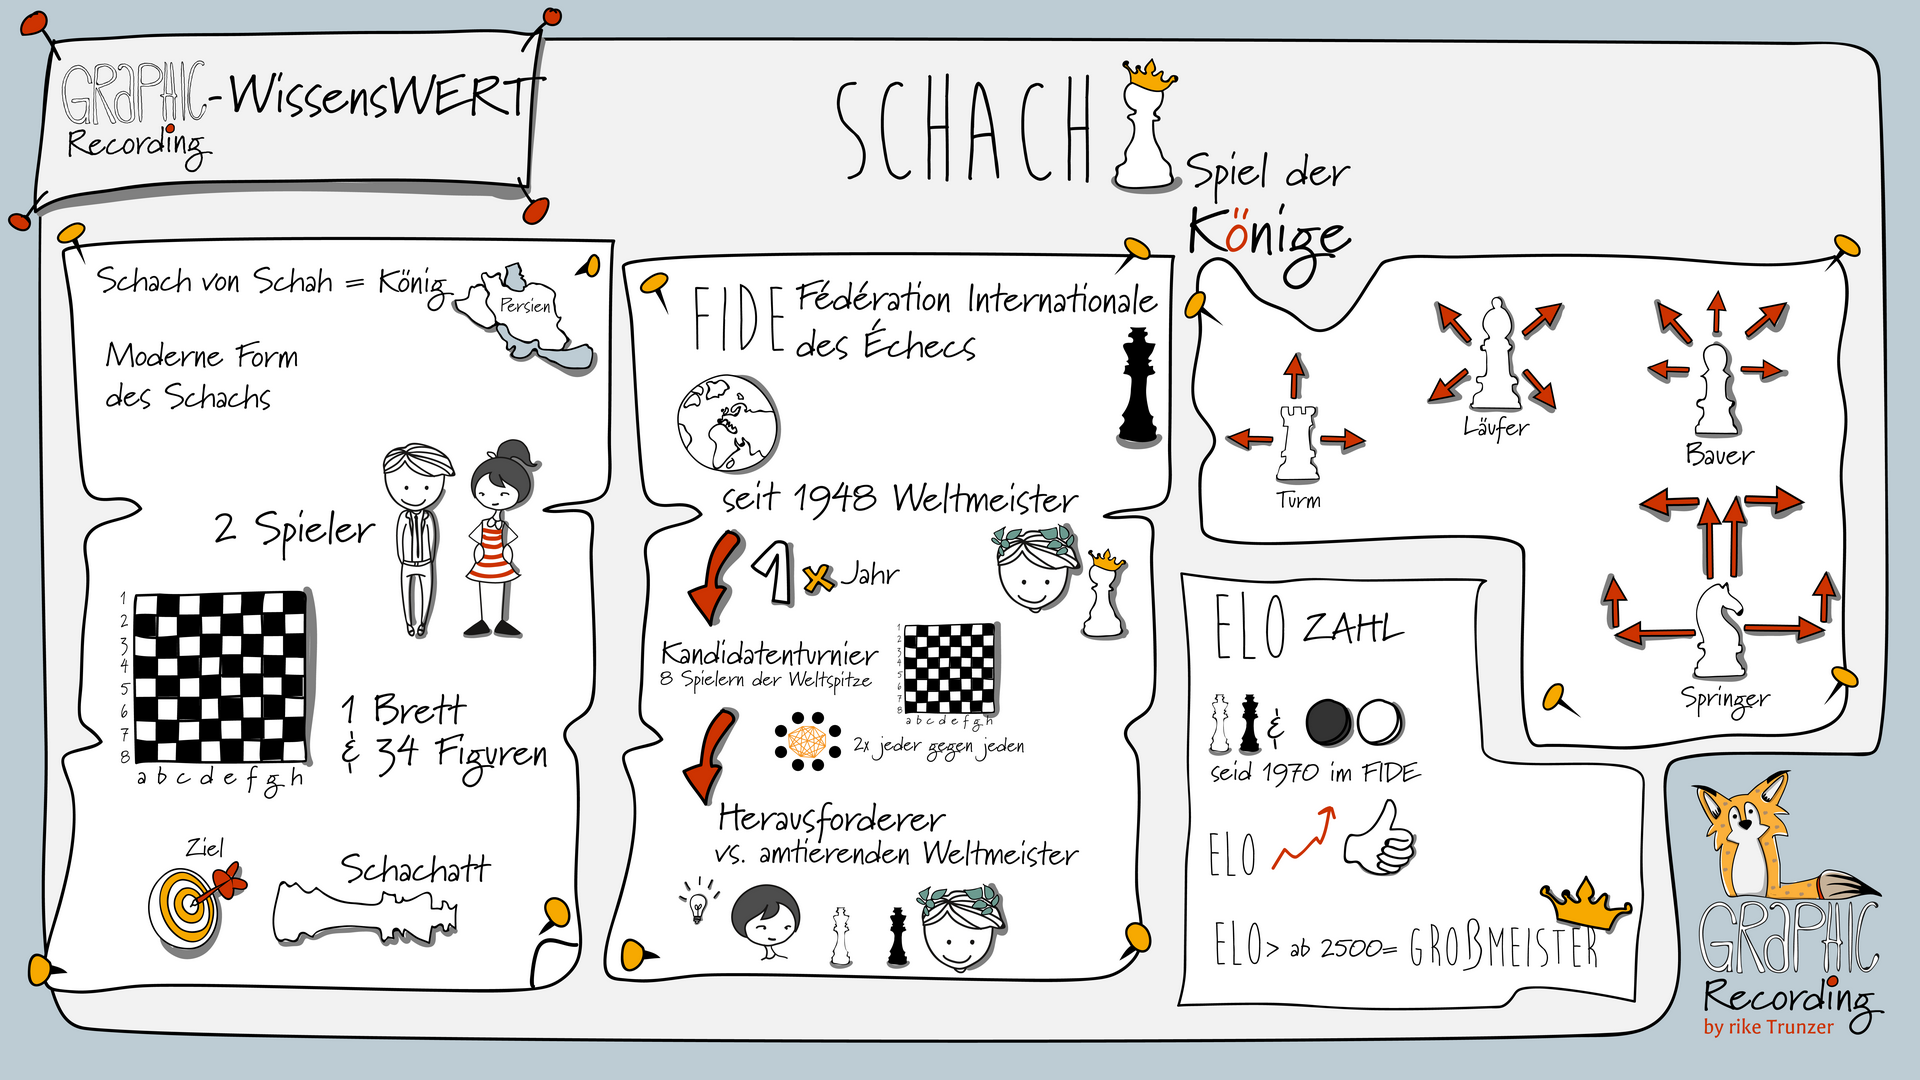 Graphic recording: Schach